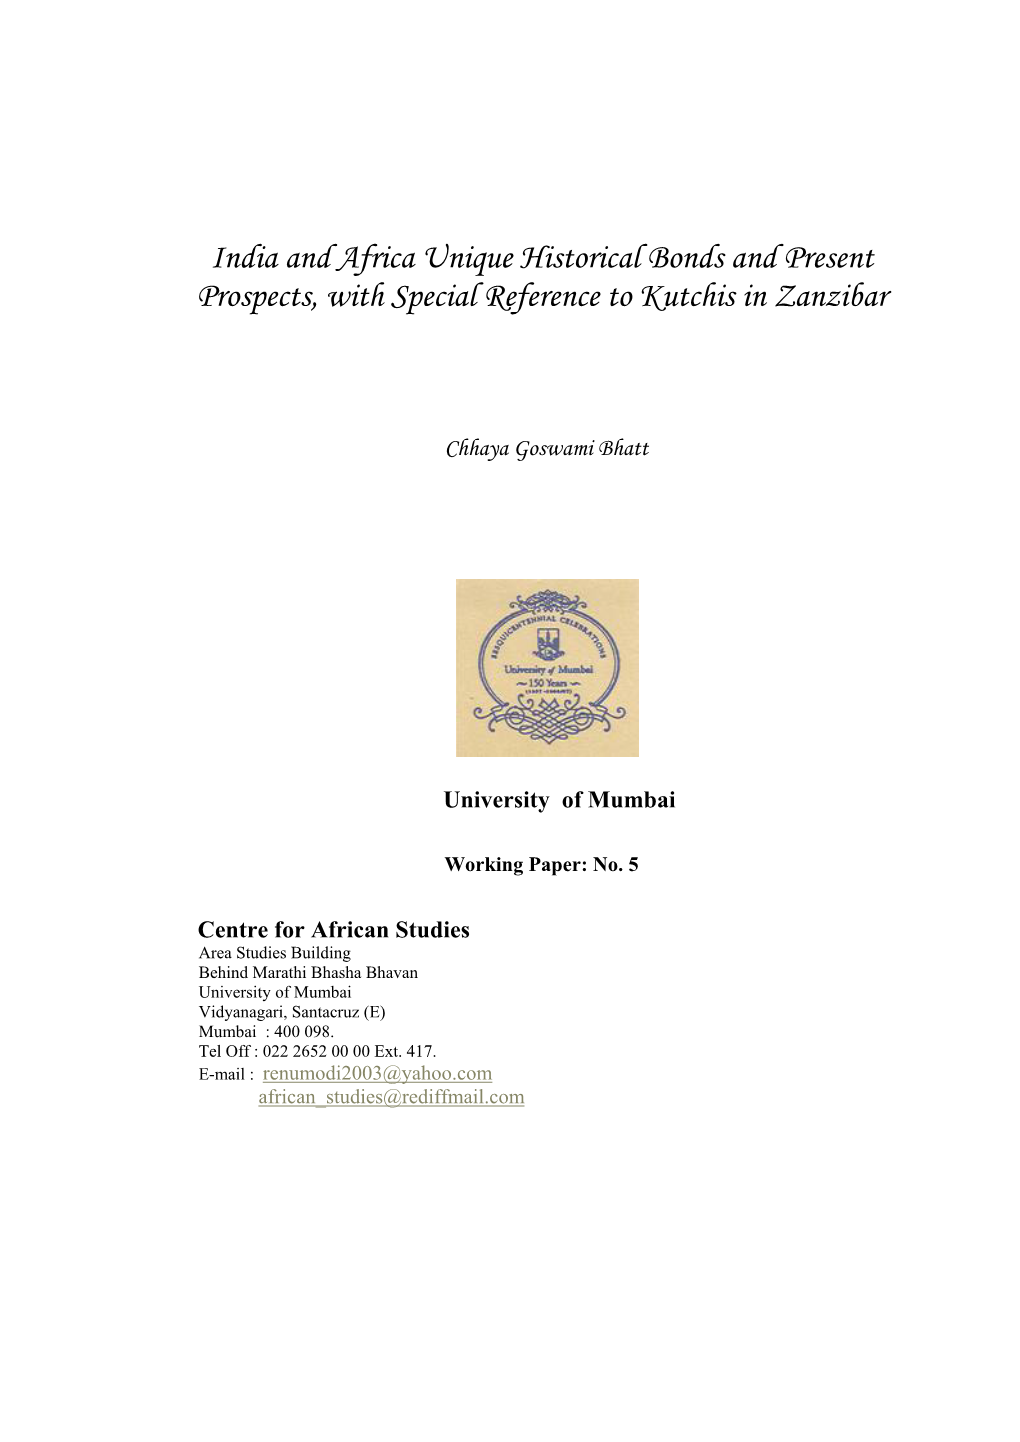 India and Africa Unique Historical Bonds and Present Prospects, with Special Reference to Kutchis in Zanzibar